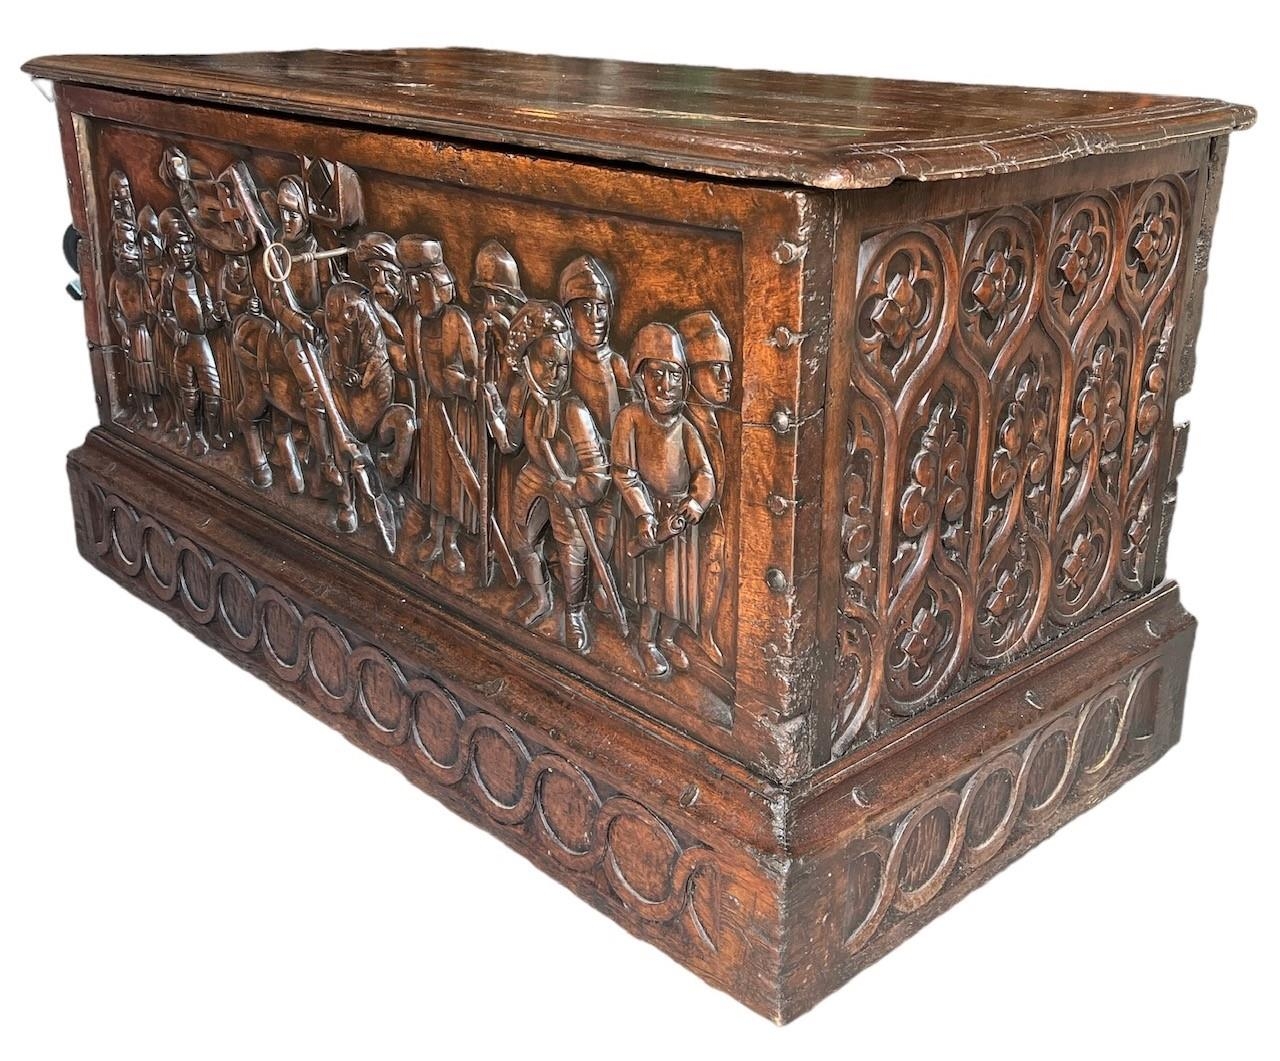 A RARE 15TH CENTURY FRENCH CARVED WALNUT COFFER,With hinge lid above carved panel in relief with a - Image 3 of 4